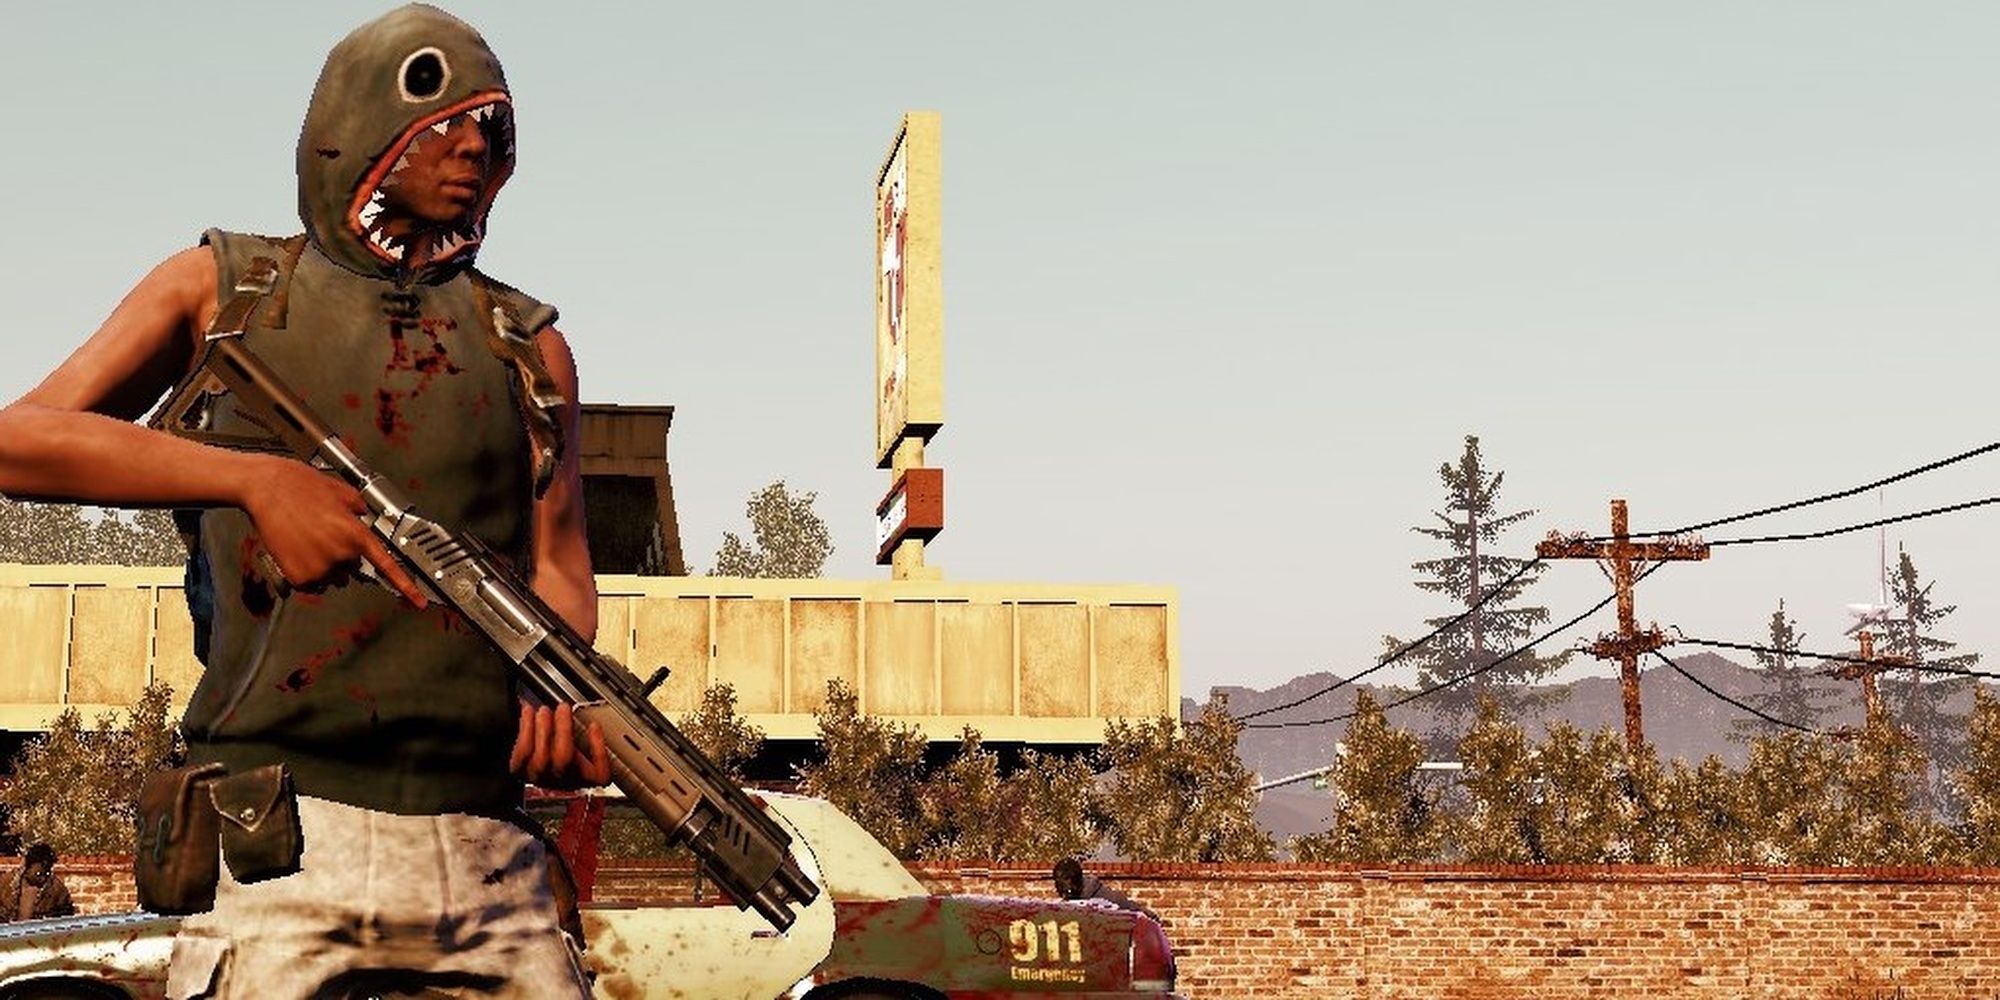 Brant's Military Surplus State of Decay Mod